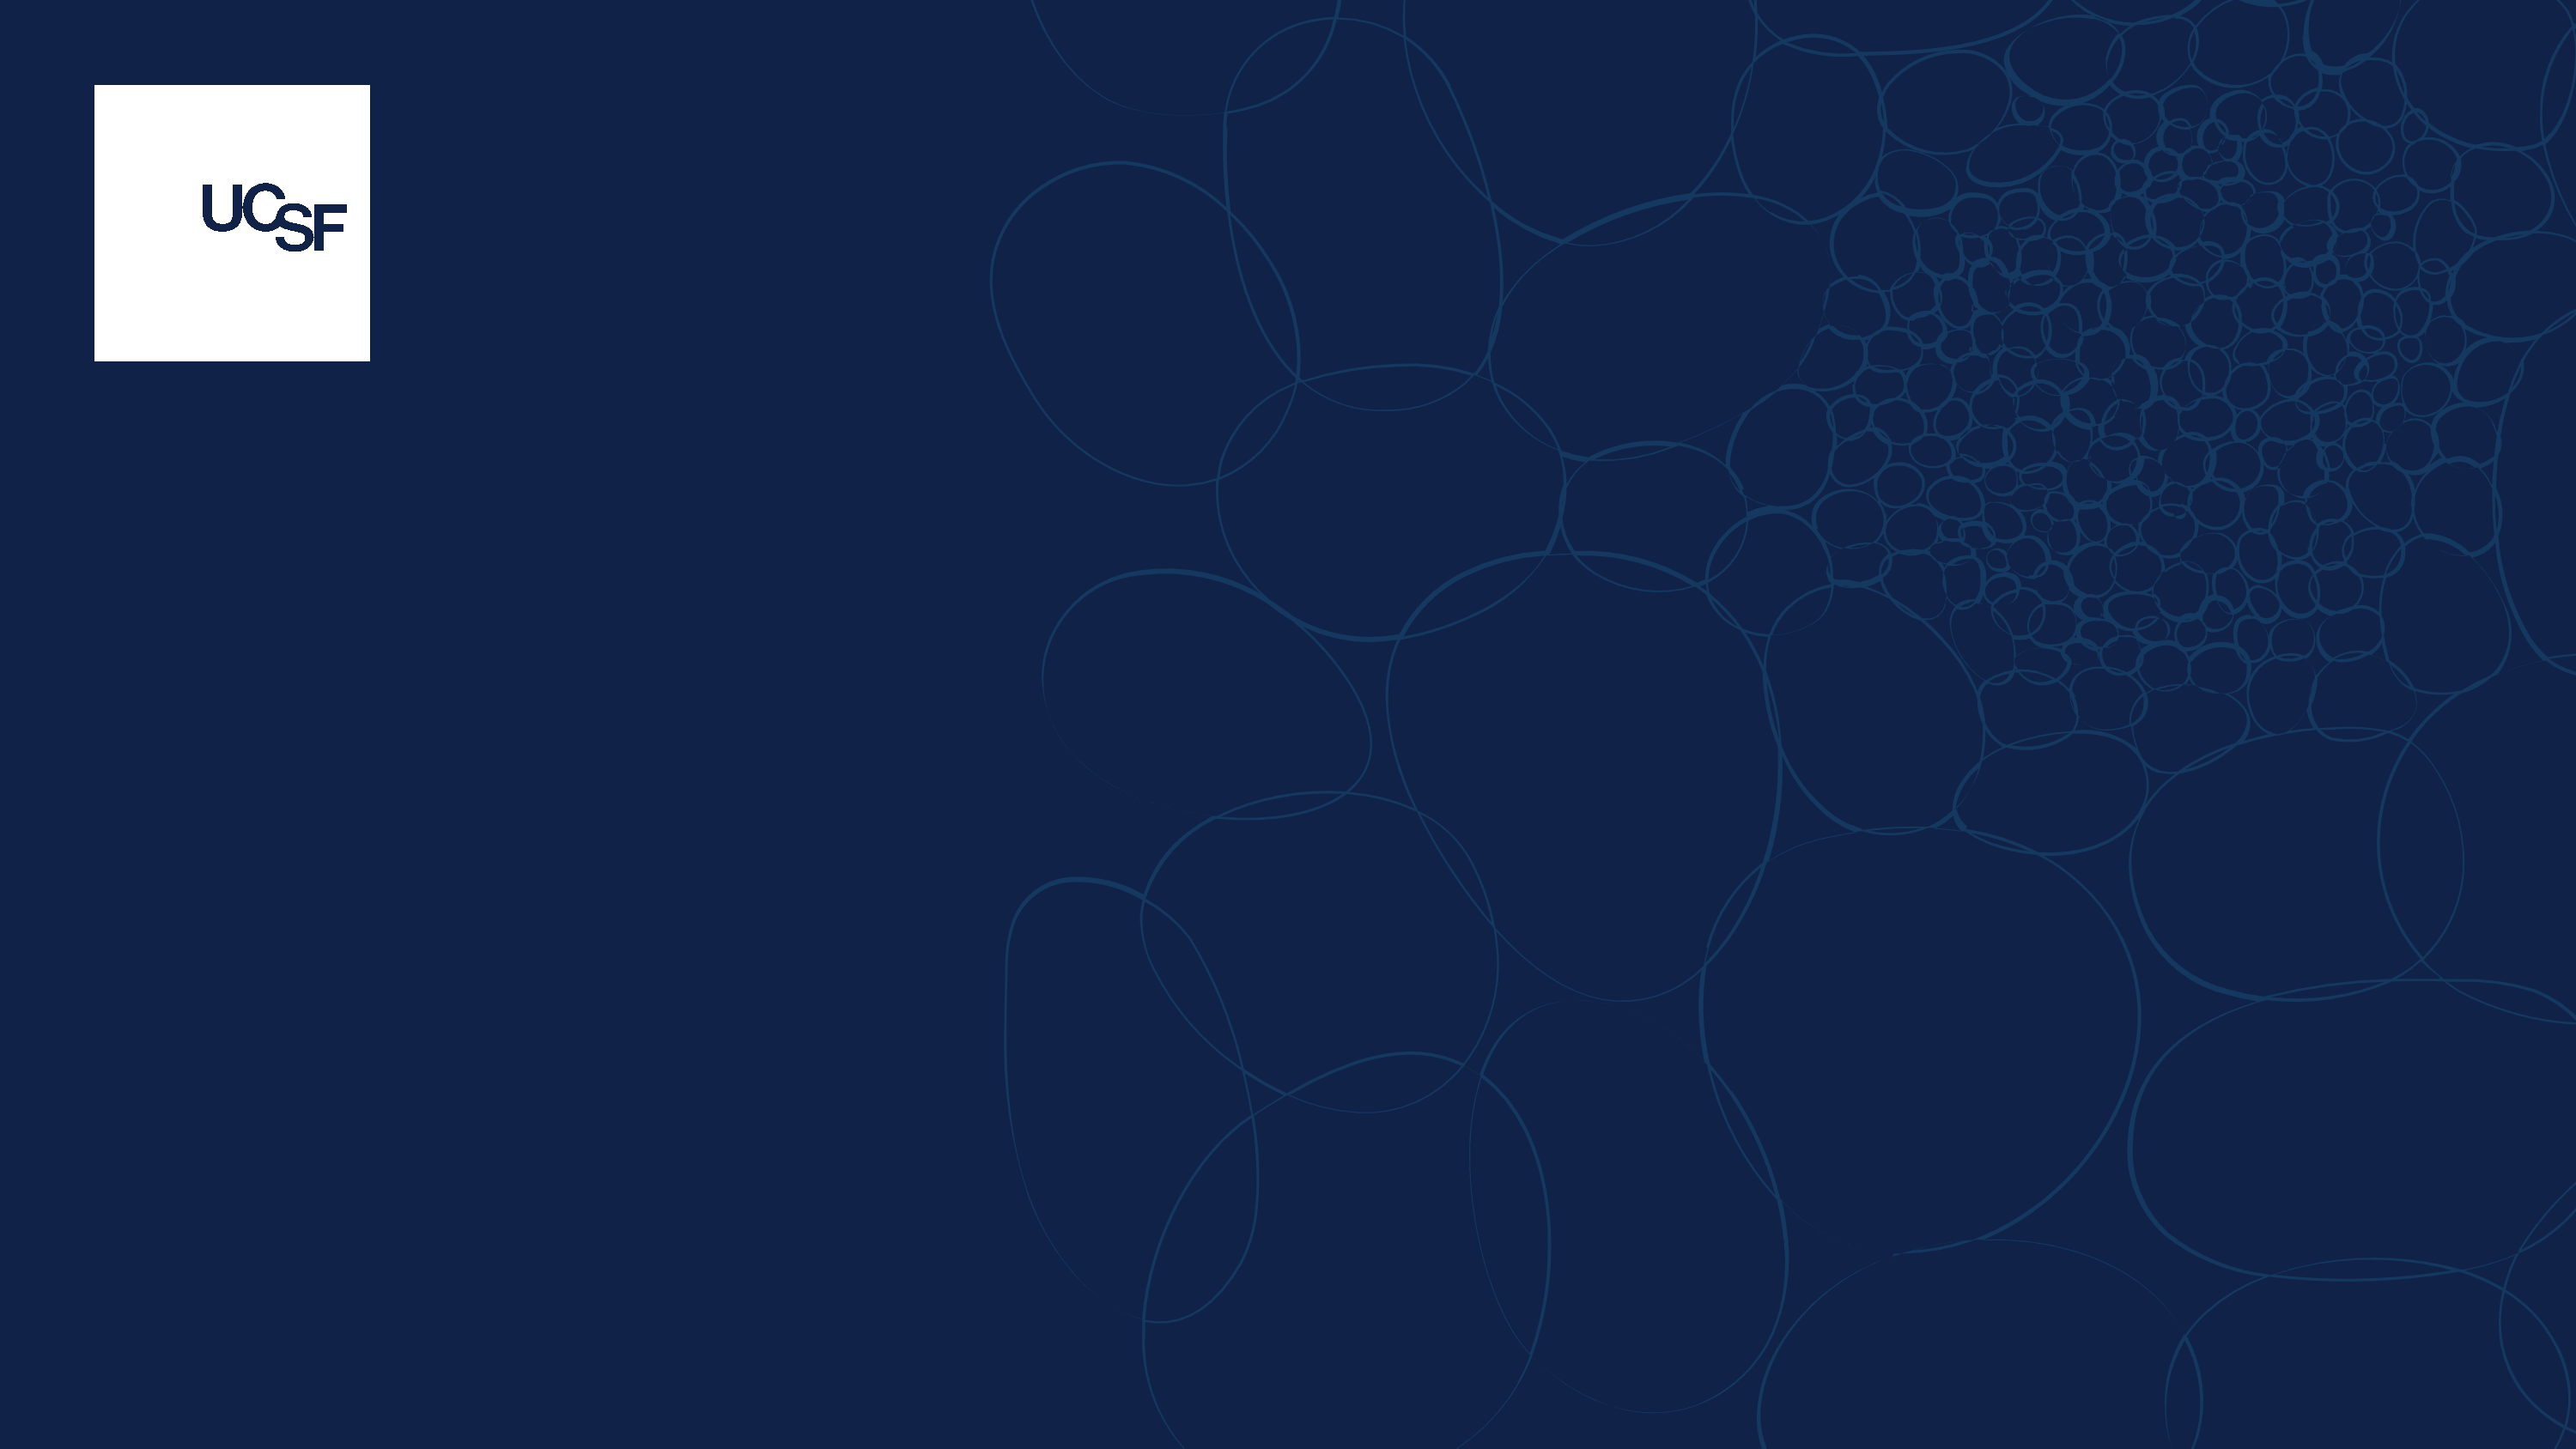 title slide example navy with scientific pattern bubbles